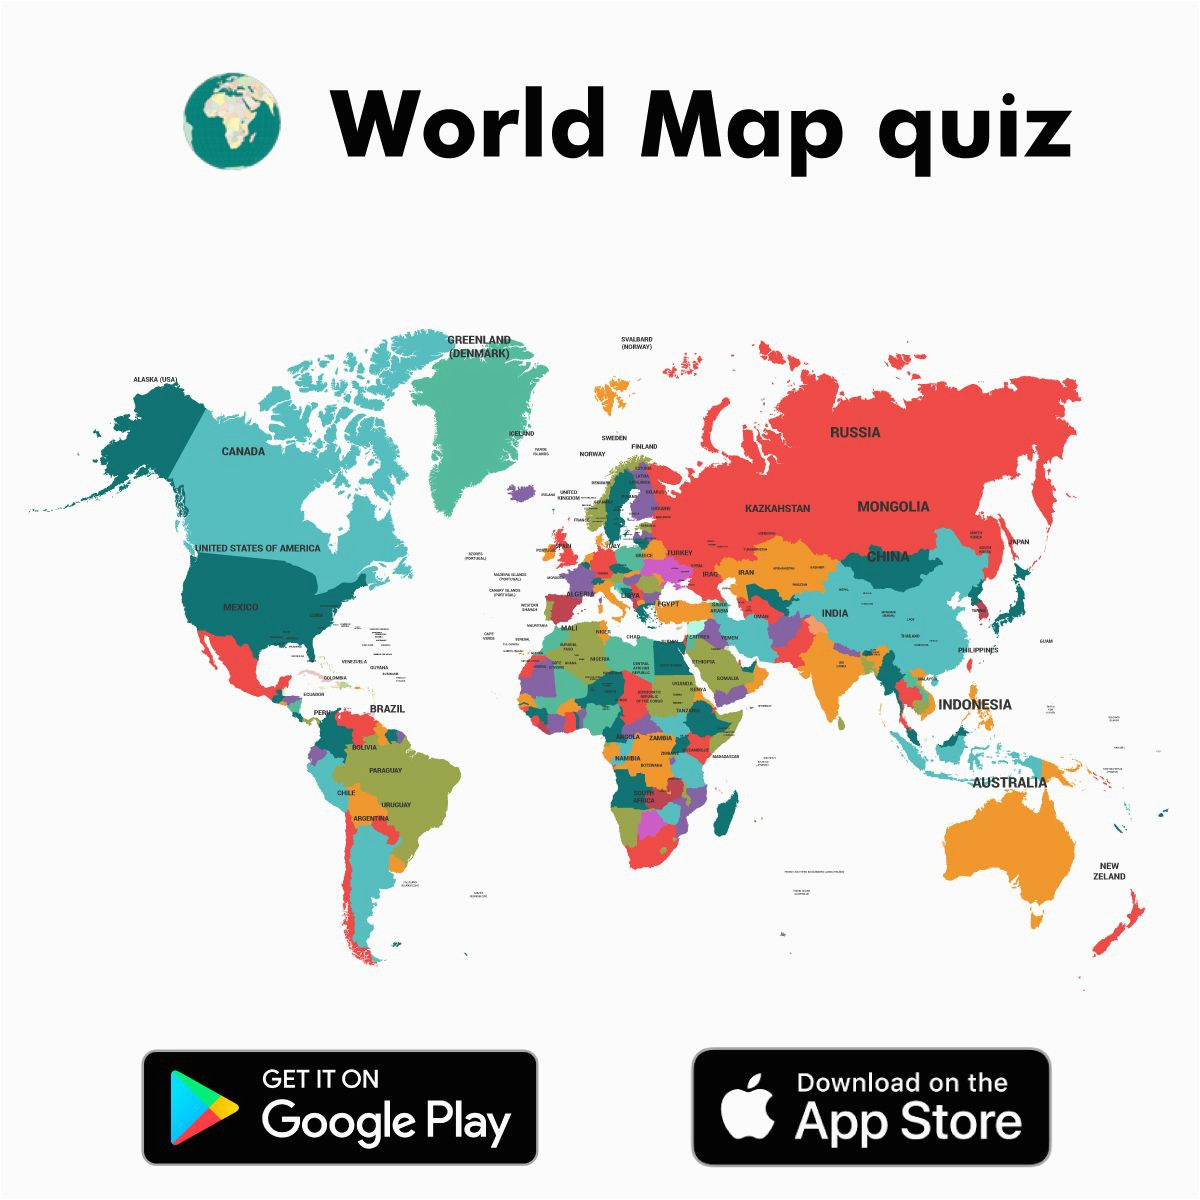 Europe Map Quiz Games World Map Quiz App is An Interesting App Developed for Kids